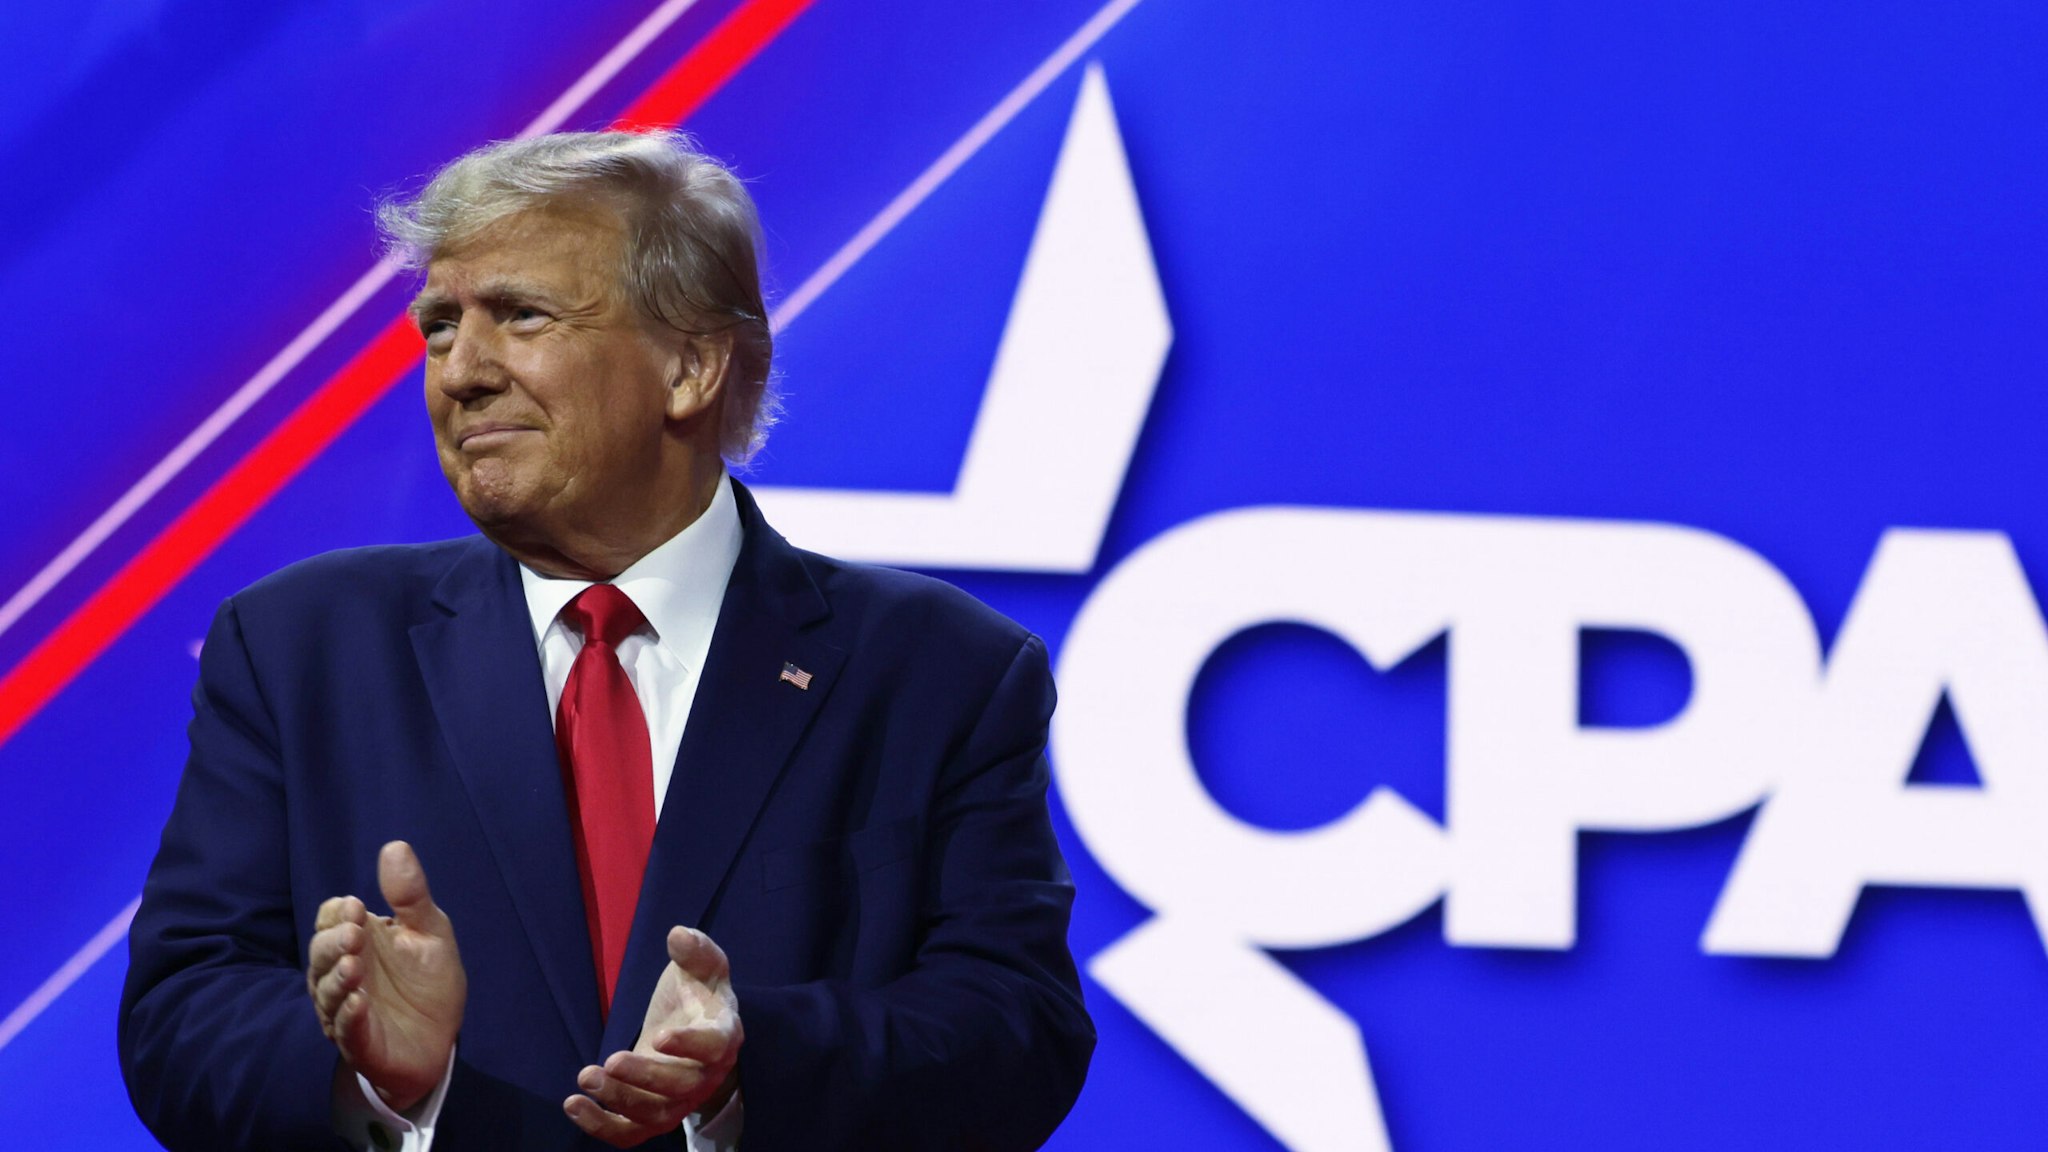 Former President Trump touted his White House experience and vowed to “deal with the RINOs” in a fiery speech Saturday at the Conservative Political Action Conference, where he easily won the 2024 presidential straw poll